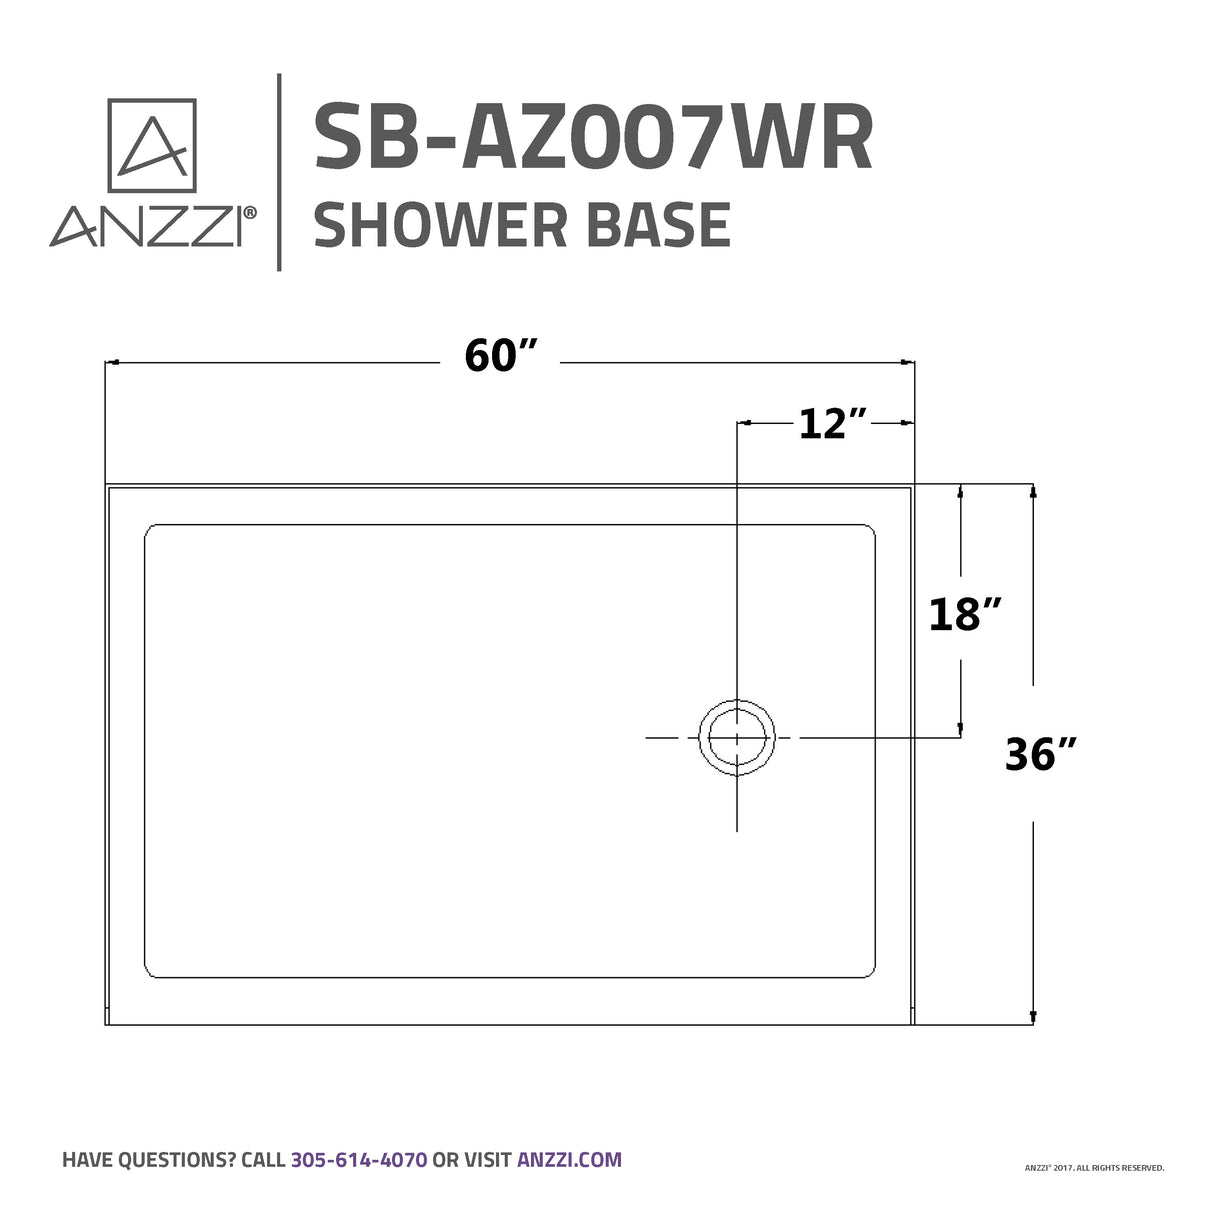 ANZZI SB-AZ007WR Colossi Series 36 in. x 60 in. Single Threshold Shower Base in White